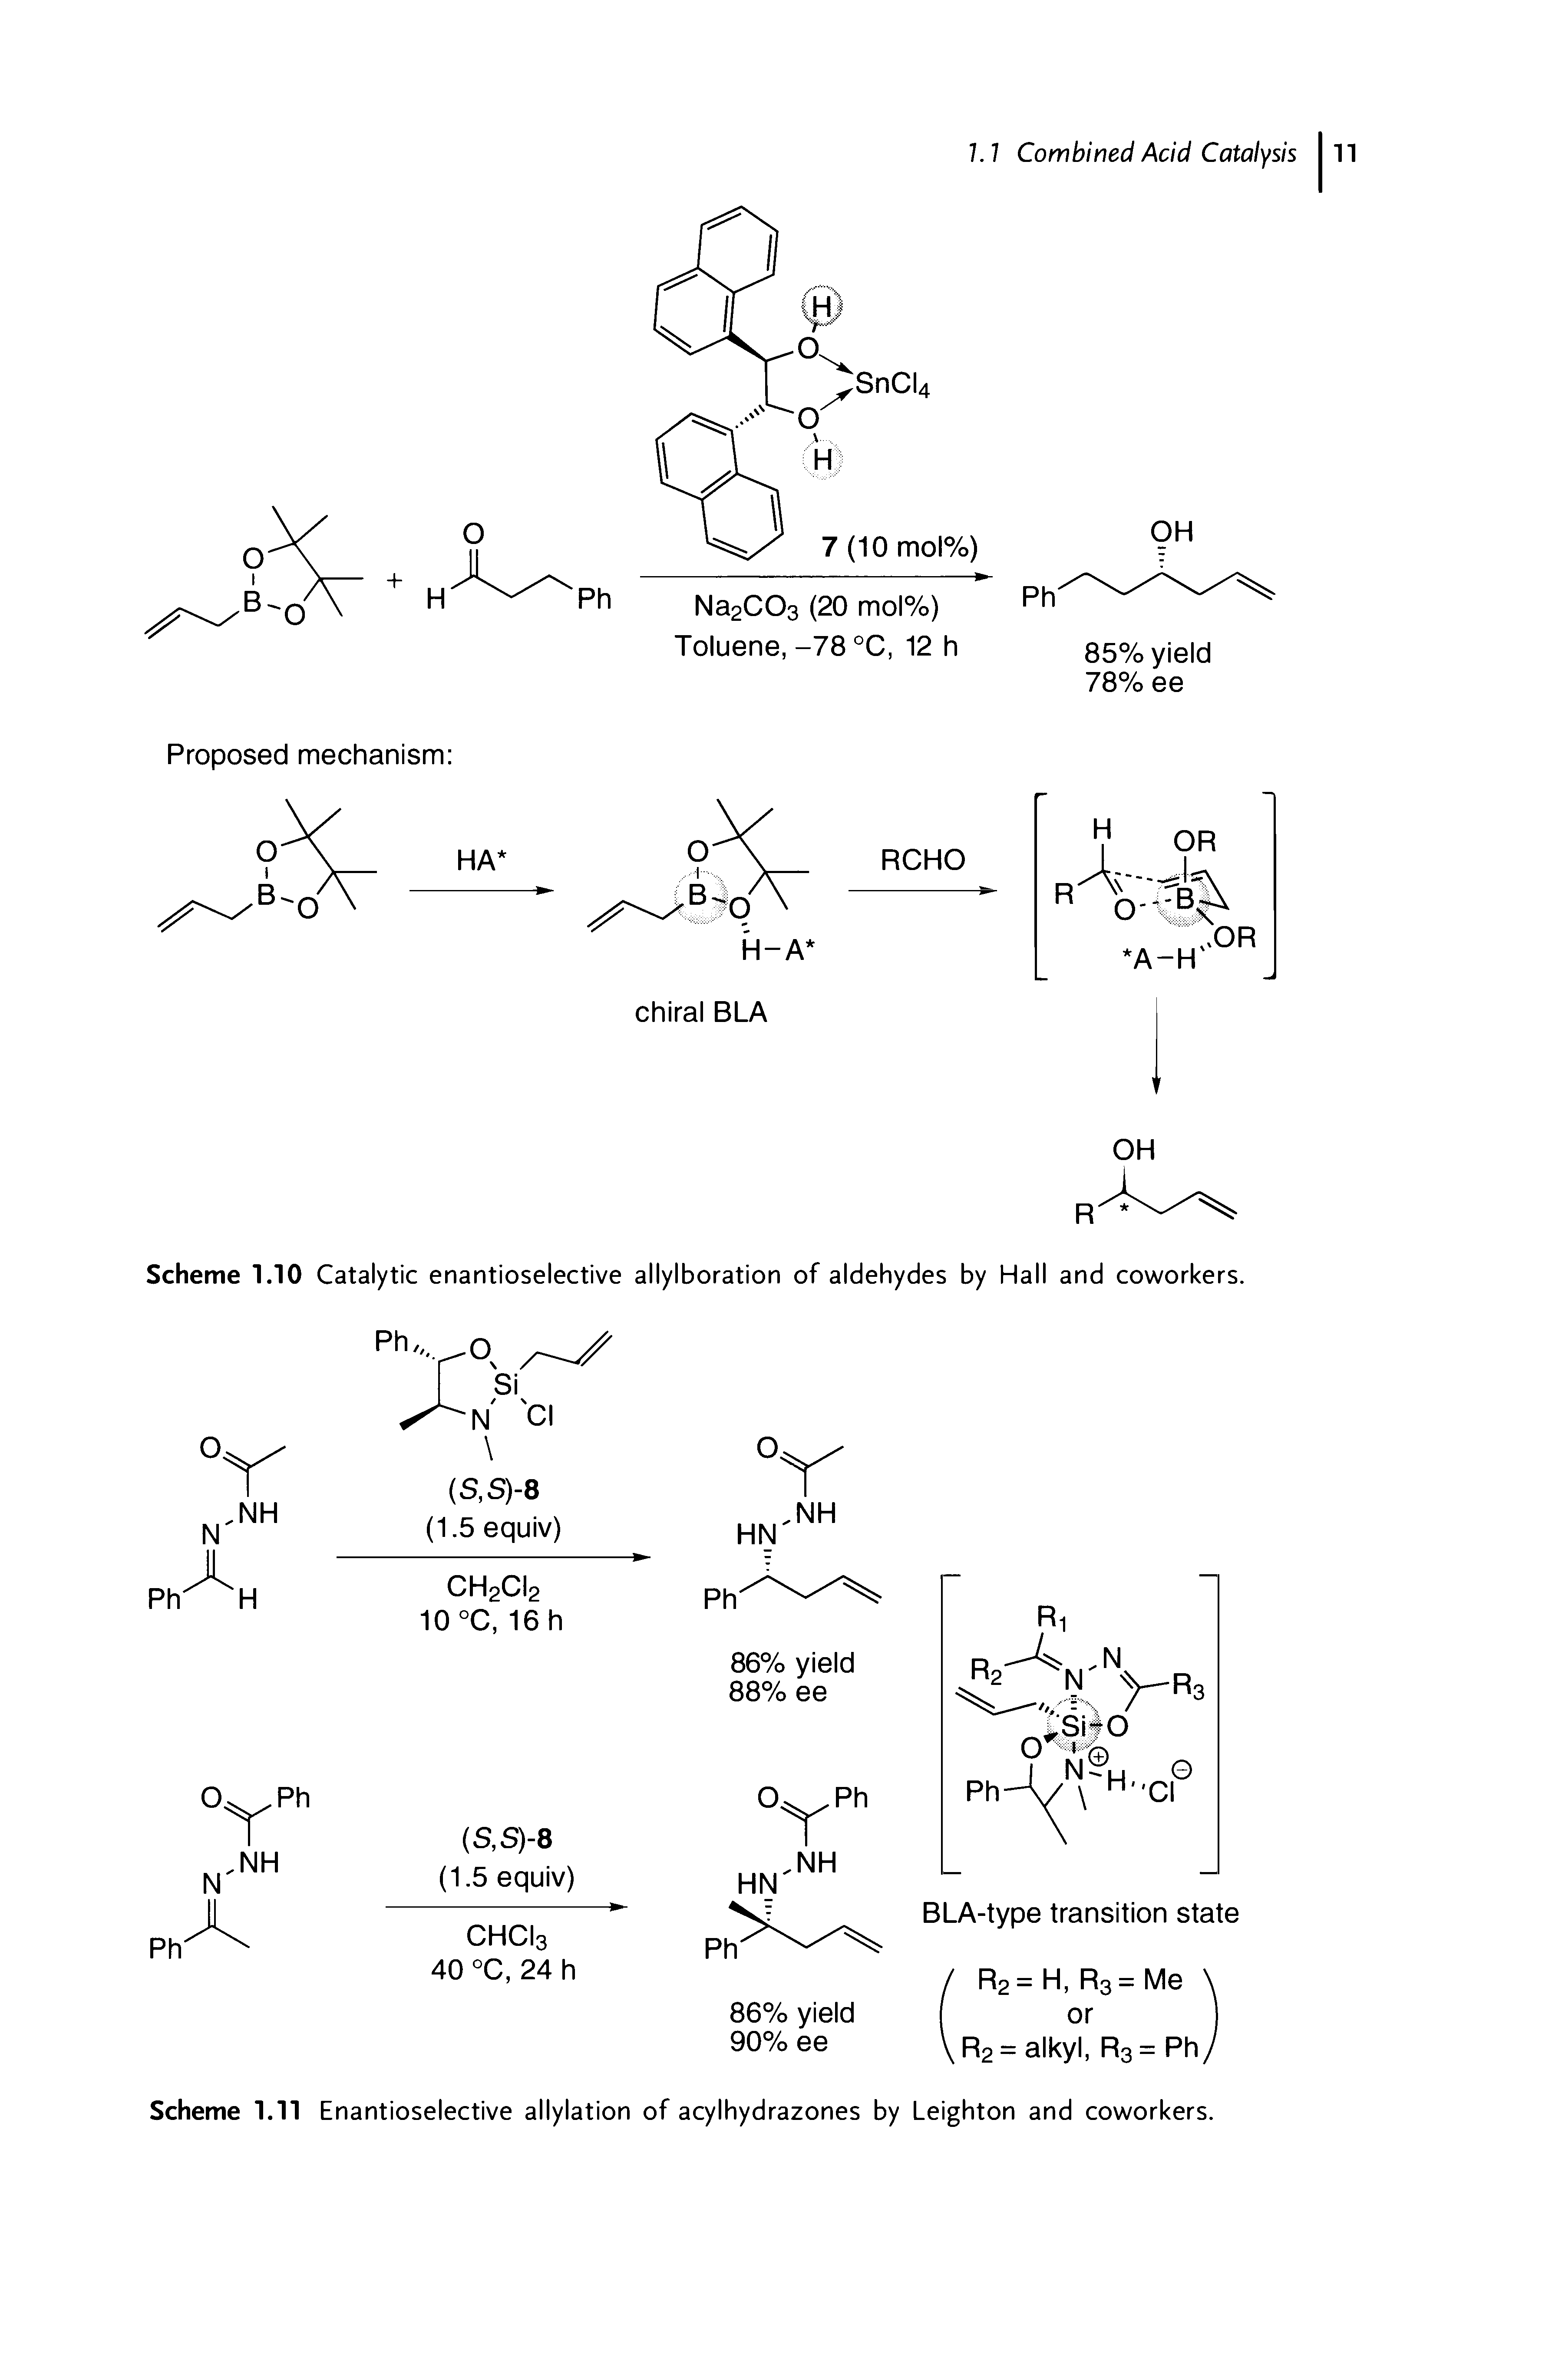 Scheme 1.10 Catalytic enantioselective allylboration of aldehydes by Hall and coworkers.